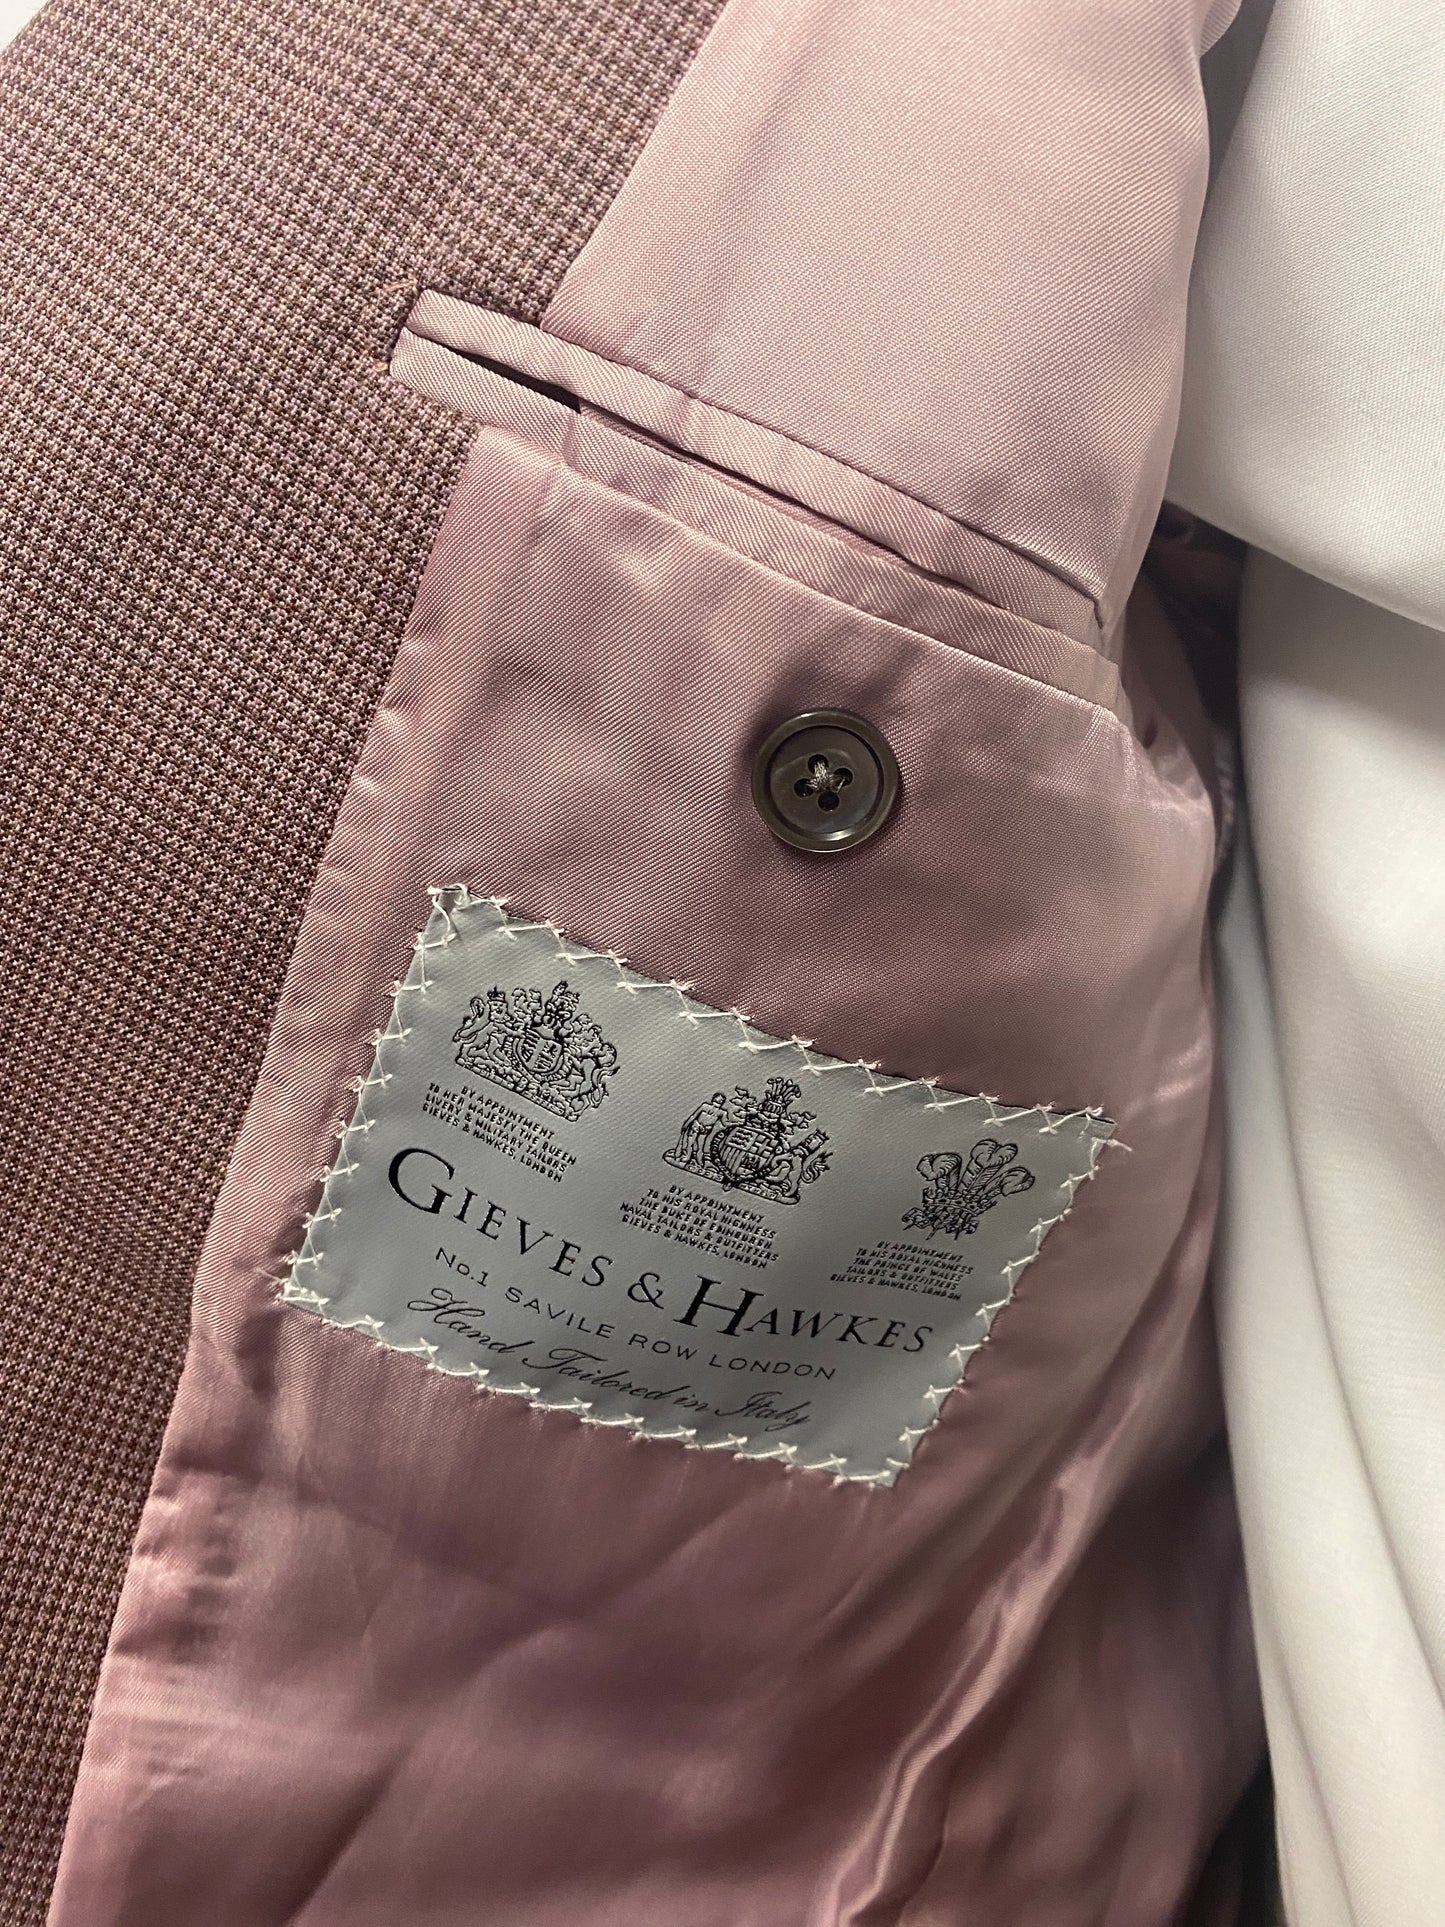 Gieves and Hawkes Pink Houndstooth Wool Suit CH42